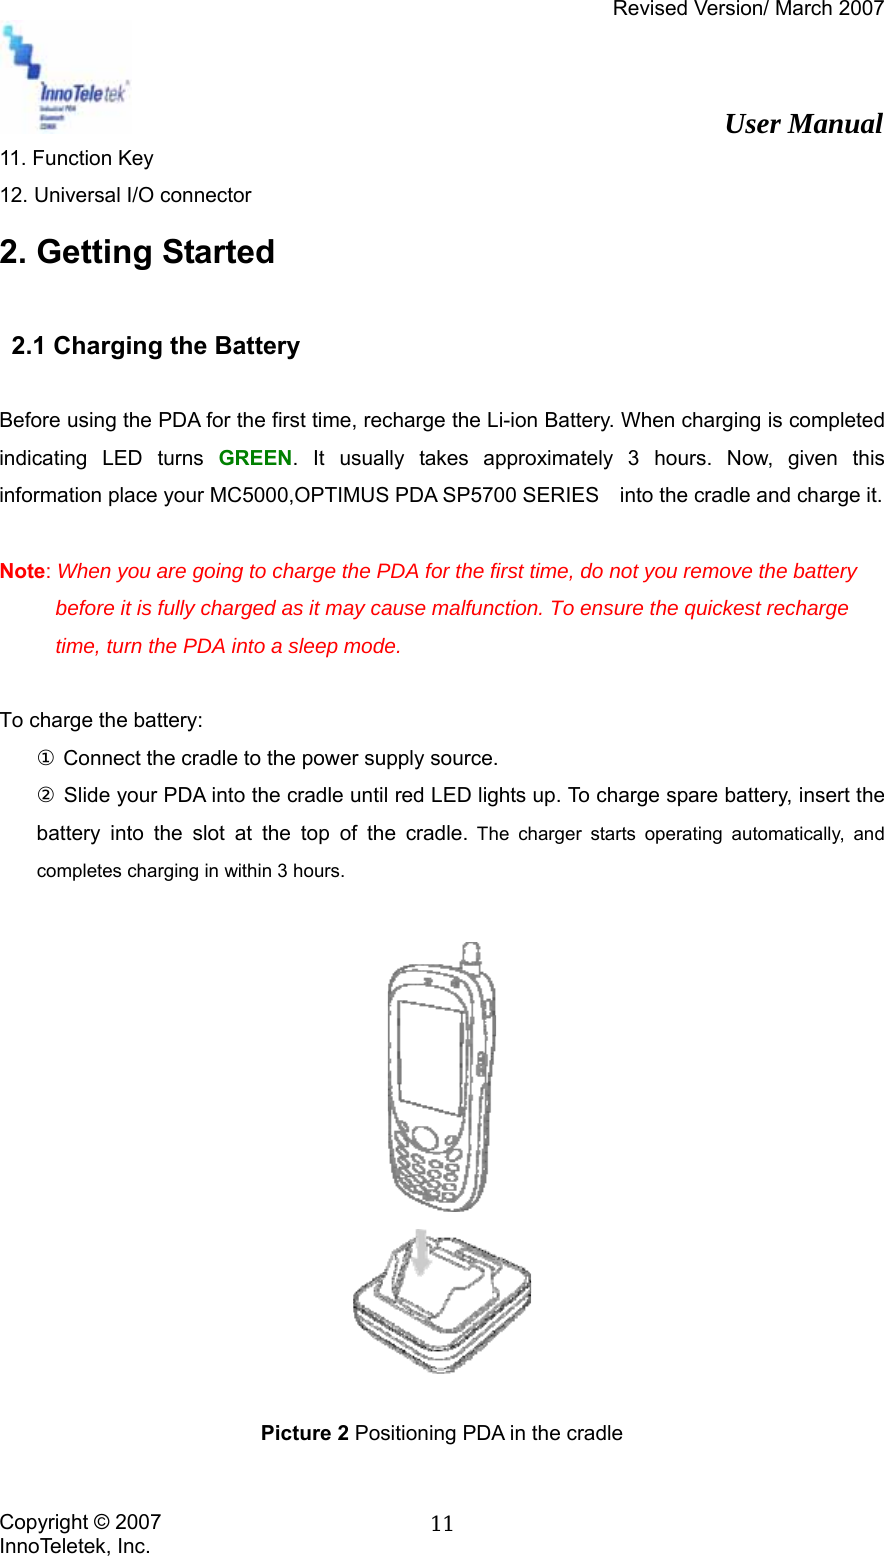 Revised Version/ March 2007                                                          User Manual Copyright © 2007 InnoTeletek, Inc.  1111. Function Key 12. Universal I/O connector 2. Getting Started    2.1 Charging the Battery  Before using the PDA for the first time, recharge the Li-ion Battery. When charging is completed indicating LED turns GREEN. It usually takes approximately 3 hours. Now, given this information place your MC5000,OPTIMUS PDA SP5700 SERIES    into the cradle and charge it.  Note: When you are going to charge the PDA for the first time, do not you remove the battery before it is fully charged as it may cause malfunction. To ensure the quickest recharge time, turn the PDA into a sleep mode.  To charge the battery: ① Connect the cradle to the power supply source. ② Slide your PDA into the cradle until red LED lights up. To charge spare battery, insert the battery into the slot at the top of the cradle. The charger starts operating automatically, and completes charging in within 3 hours.      Picture 2 Positioning PDA in the cradle  